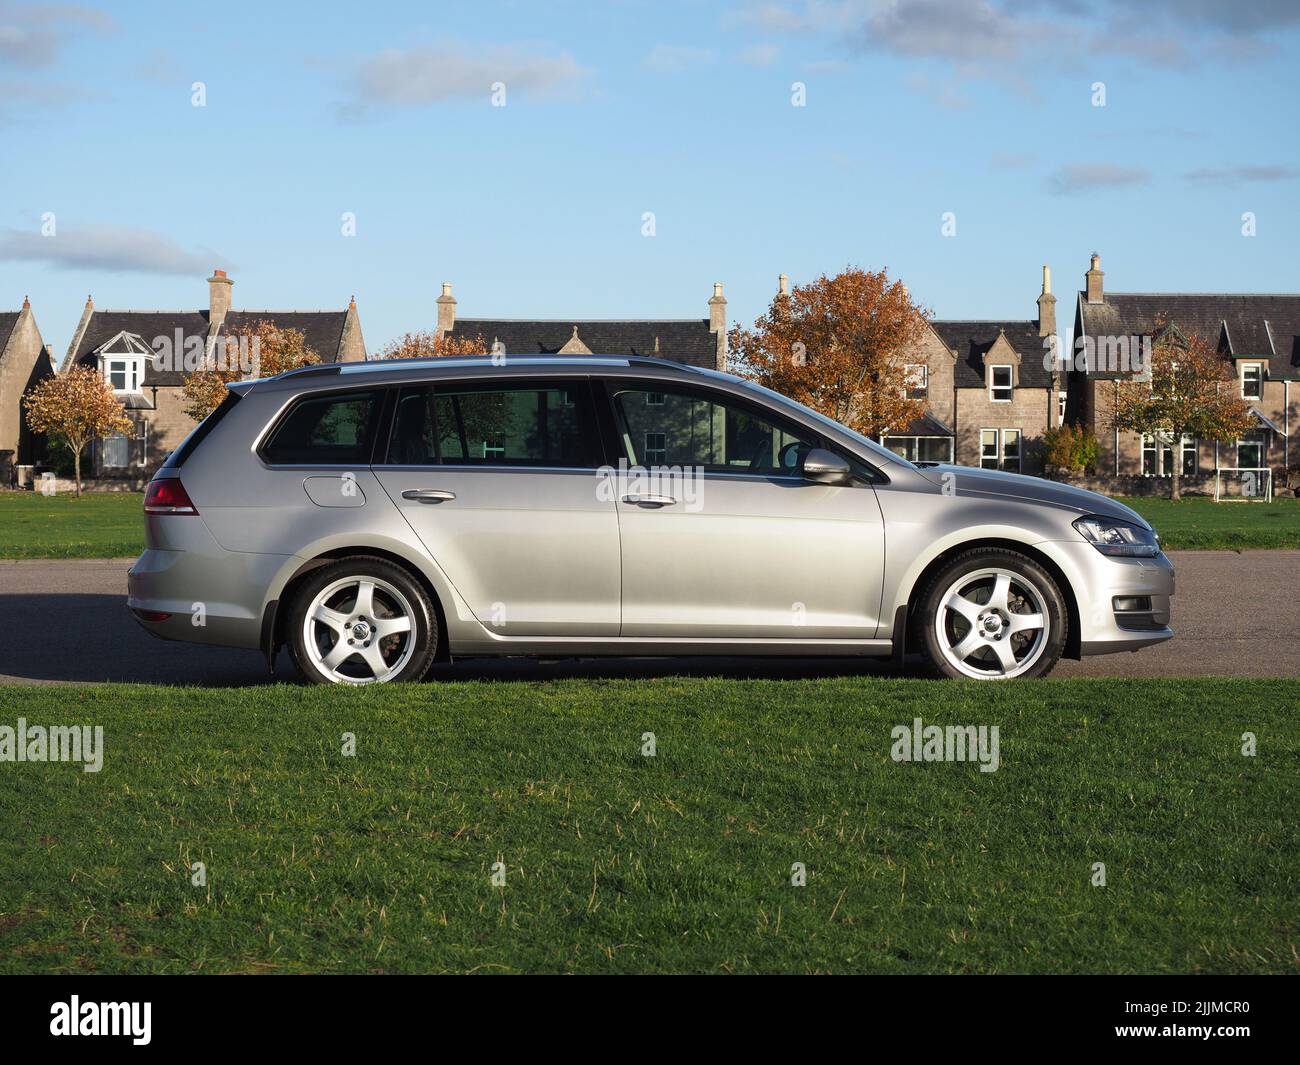 Side profile of a VW Golf Estate on a late autumn day, parked next to green grass playing fields, with stone house in background. Stock Photo